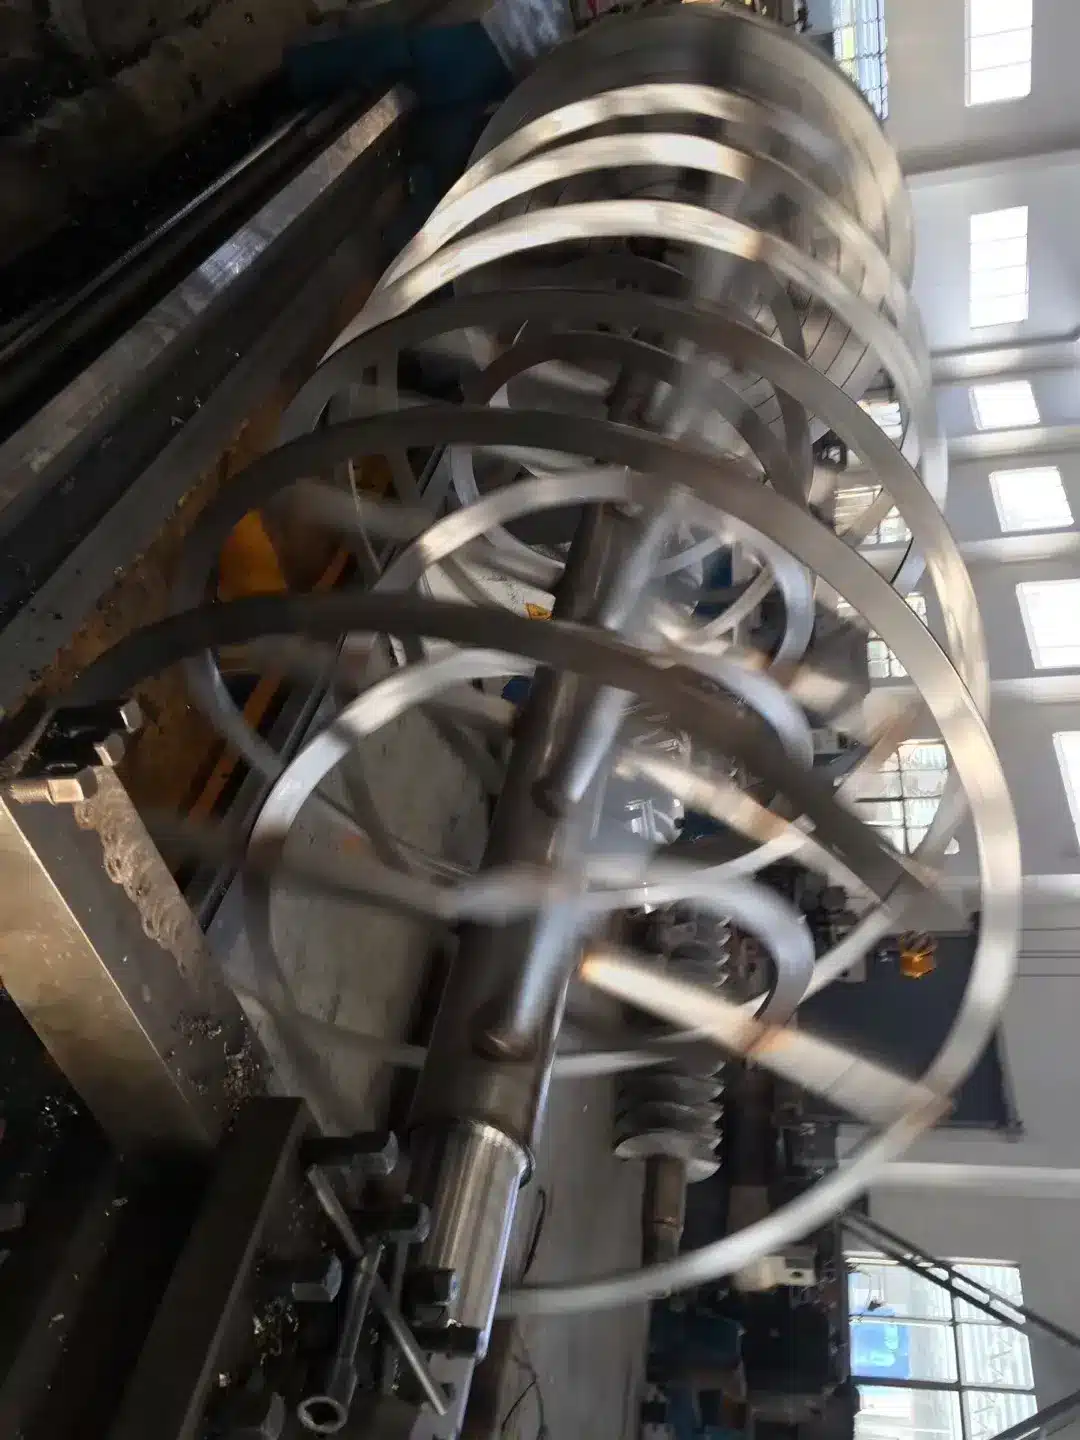 Spiraling blades of a large horizontal ribbon mixer used for industrial mixing and blending applications in a factory setting.